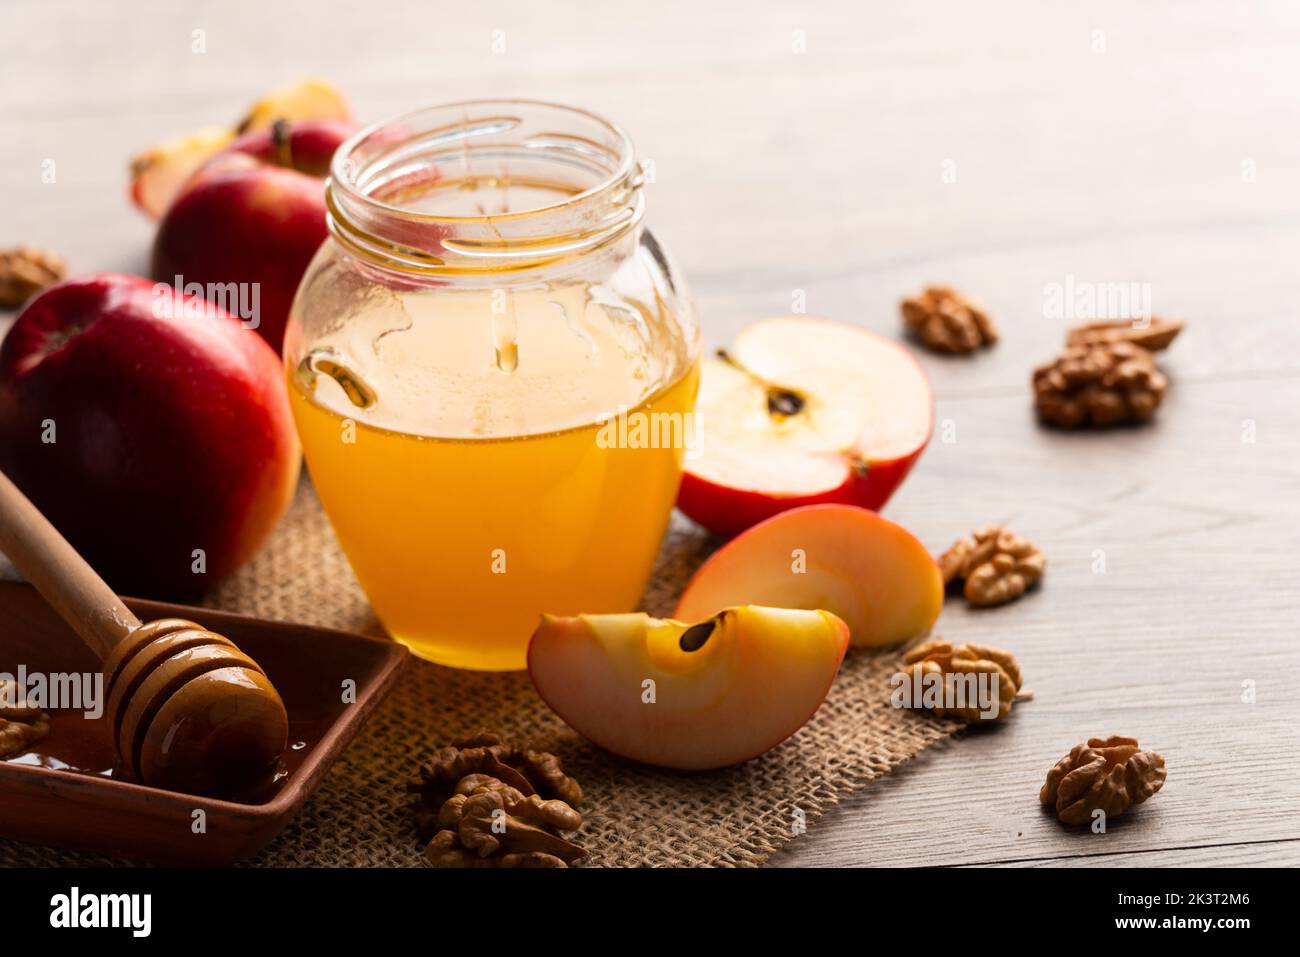 Mason jar with honey honey dipper red apples and walnuts on kitchen table Stock Photo